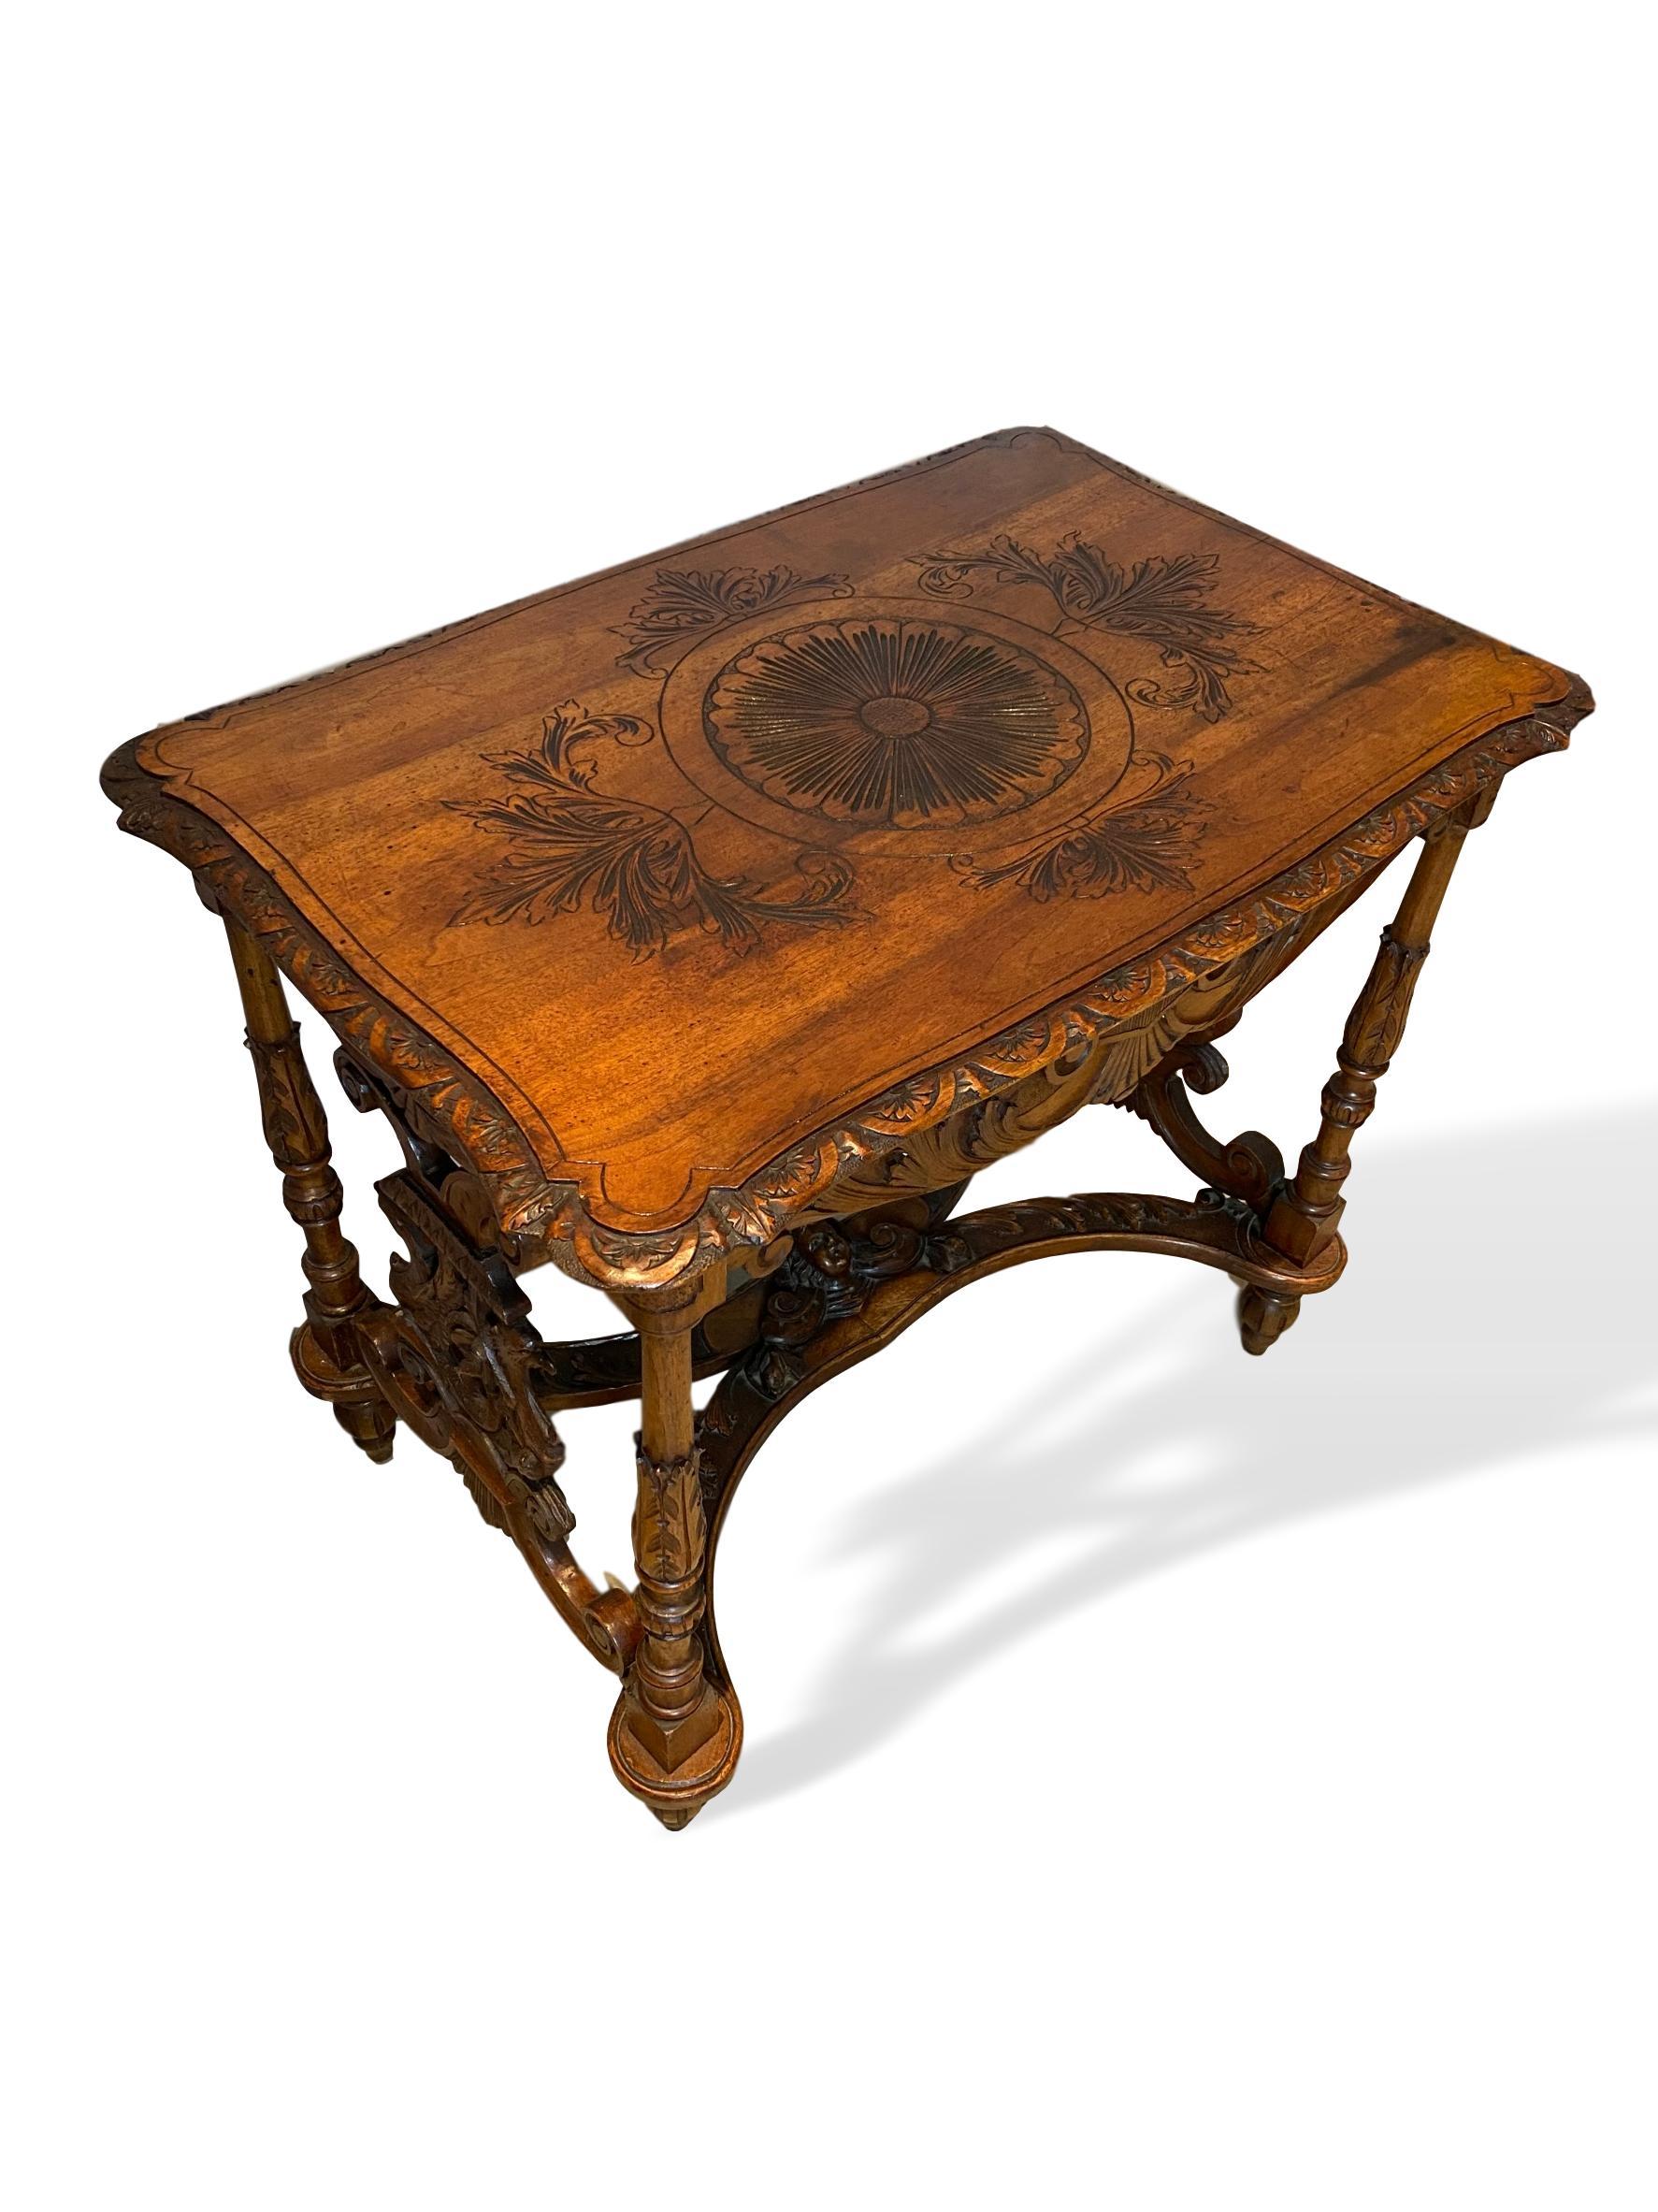 Hand-Carved Hand Carved Walnut Center Table, Italian, circa 1880